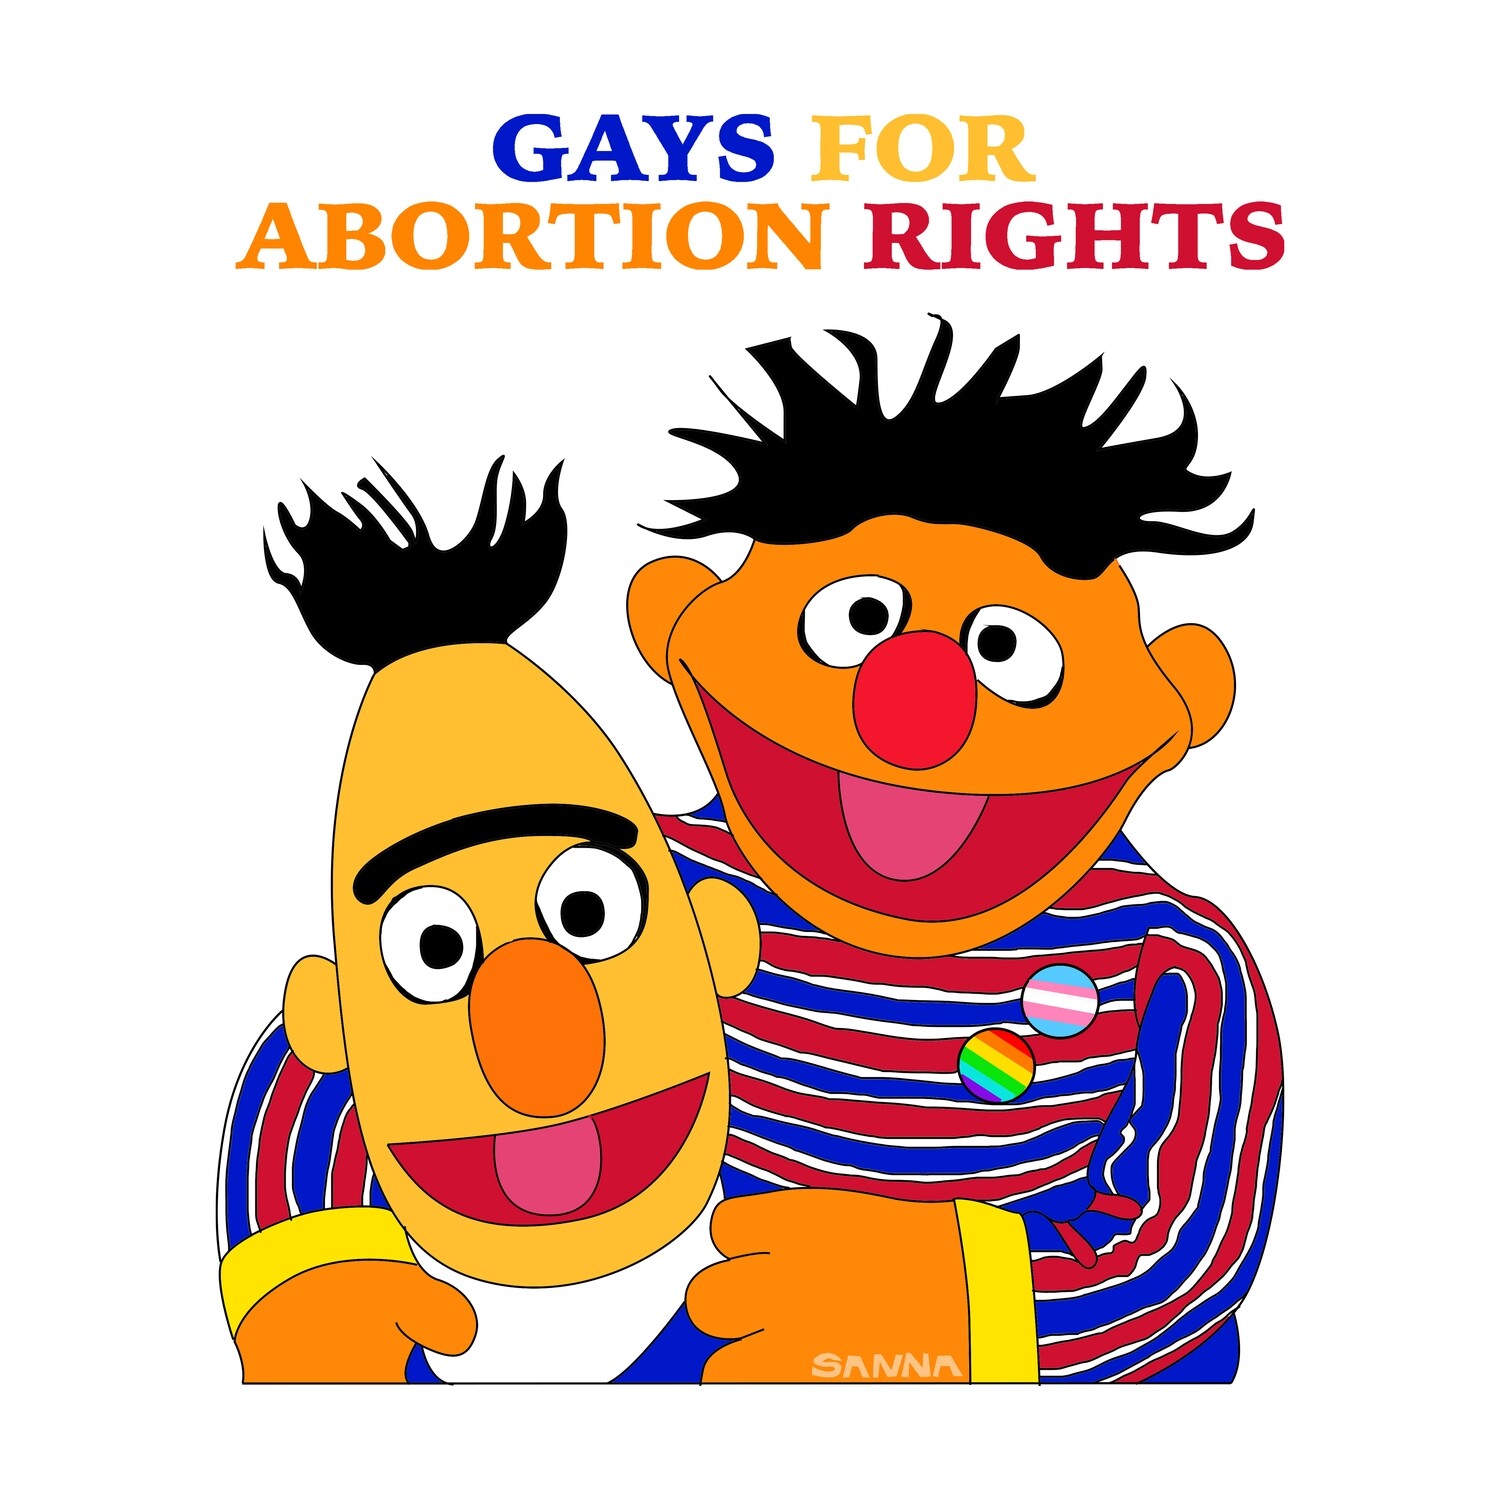 Gays For Abortion Rights